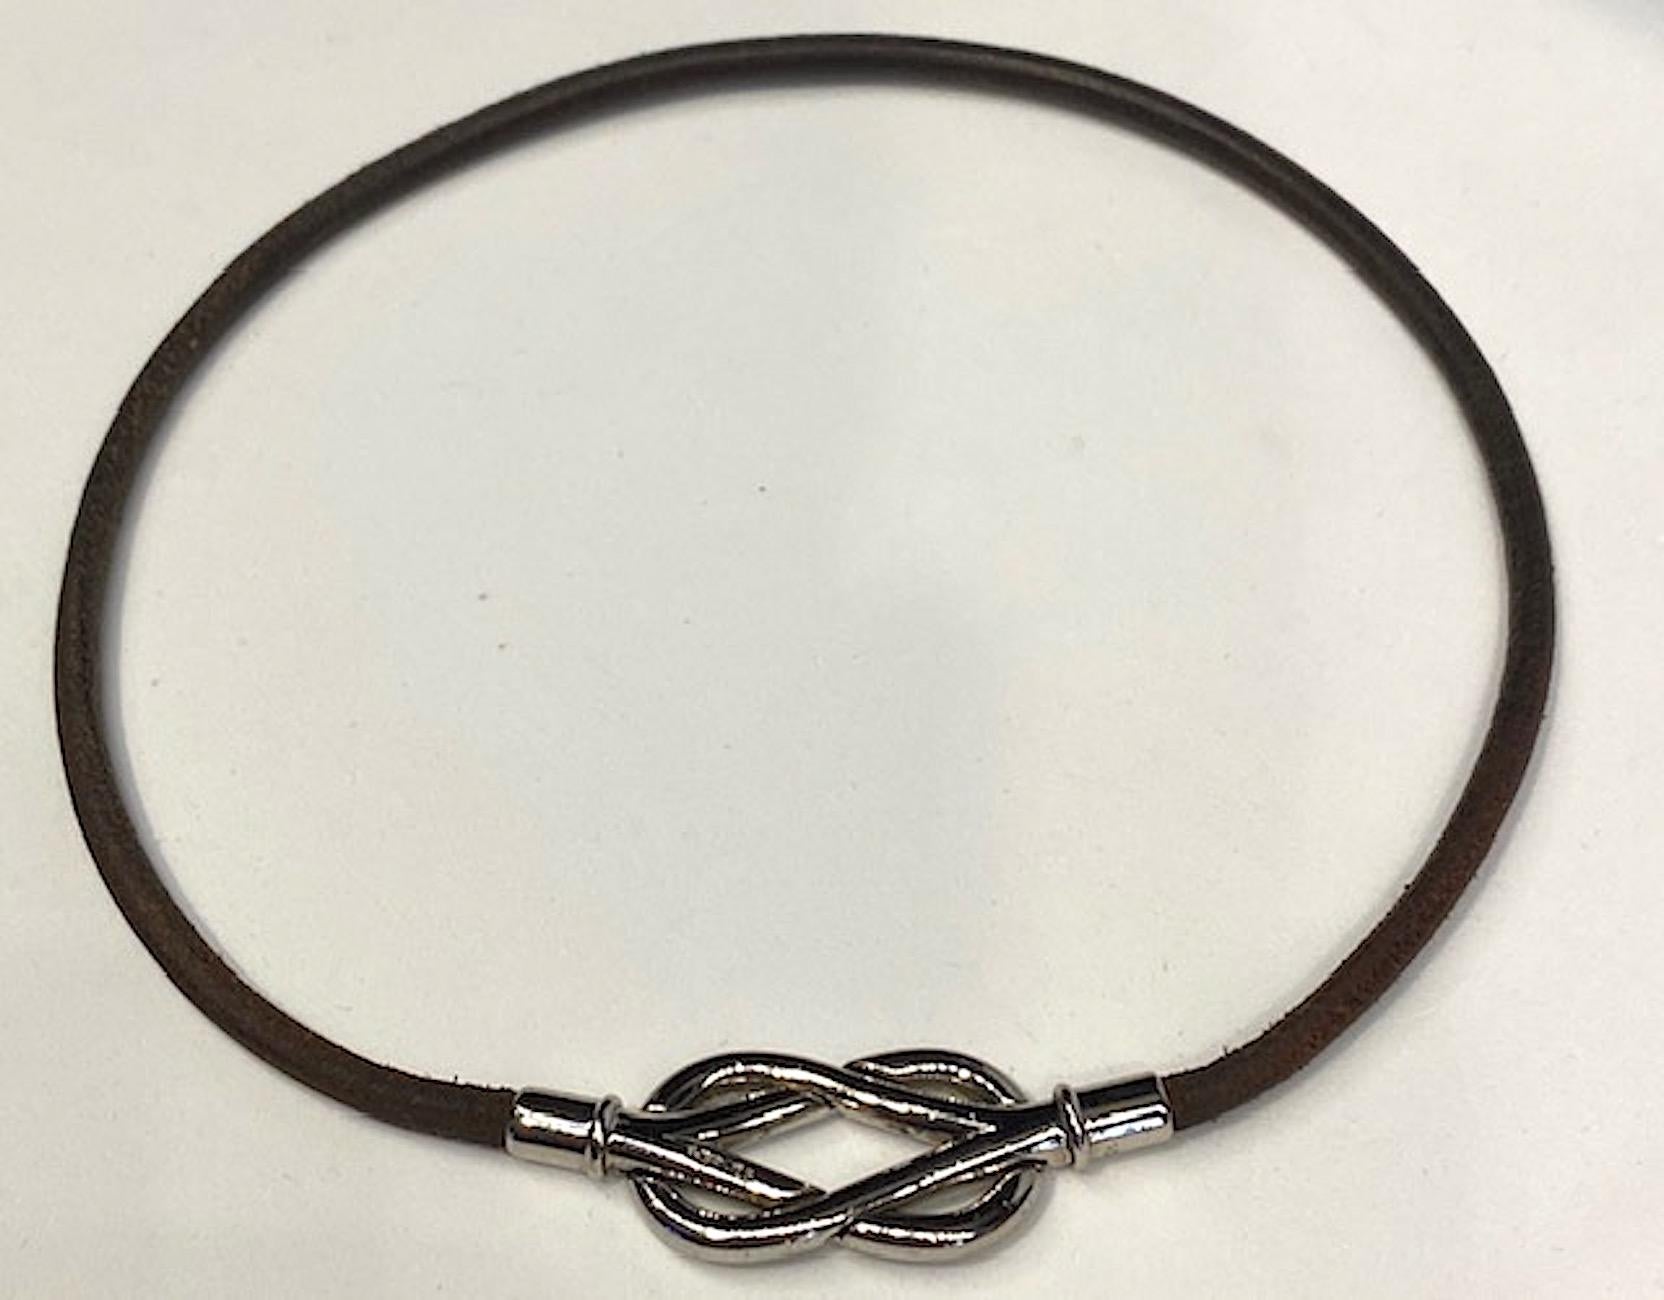 Hermes chocolate brown color leather cord with rhodium plate square knot clasp. Knot is 1.38 inches wide and .75 of an inch high not including the rhodium end pieces that hold the leather cord ends. With the rhodium end pieces the clasp is 2 inches